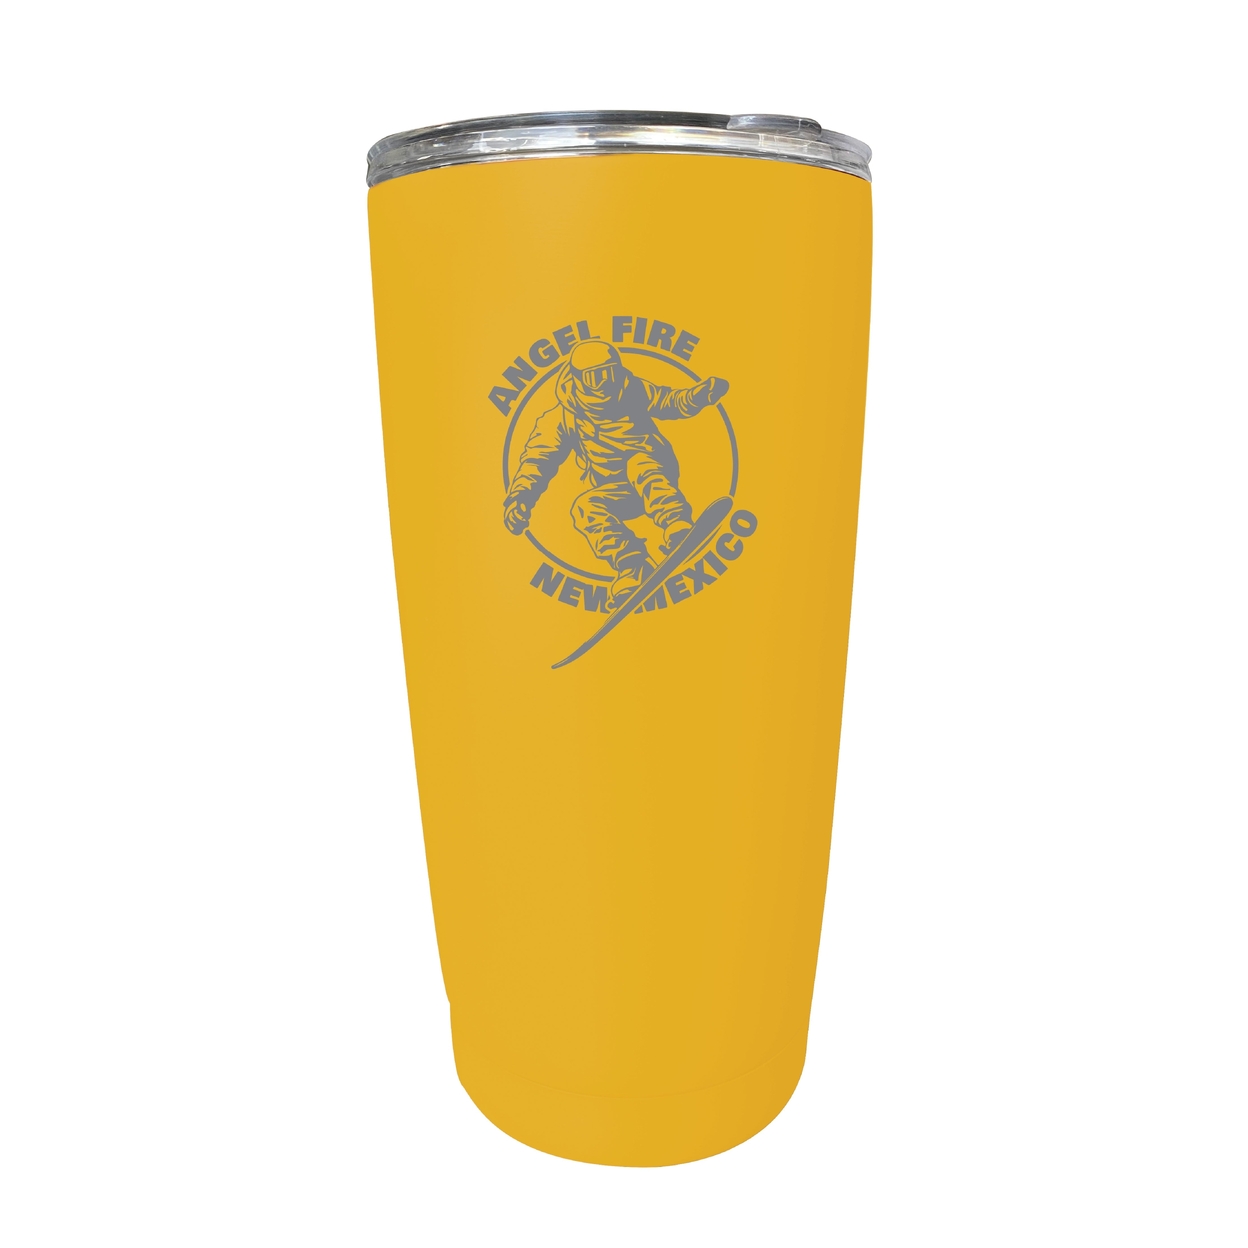 Angel Fire New Mexico Souvenir 16 Oz Engraved Stainless Steel Insulated Tumbler - Yellow,,4-Pack